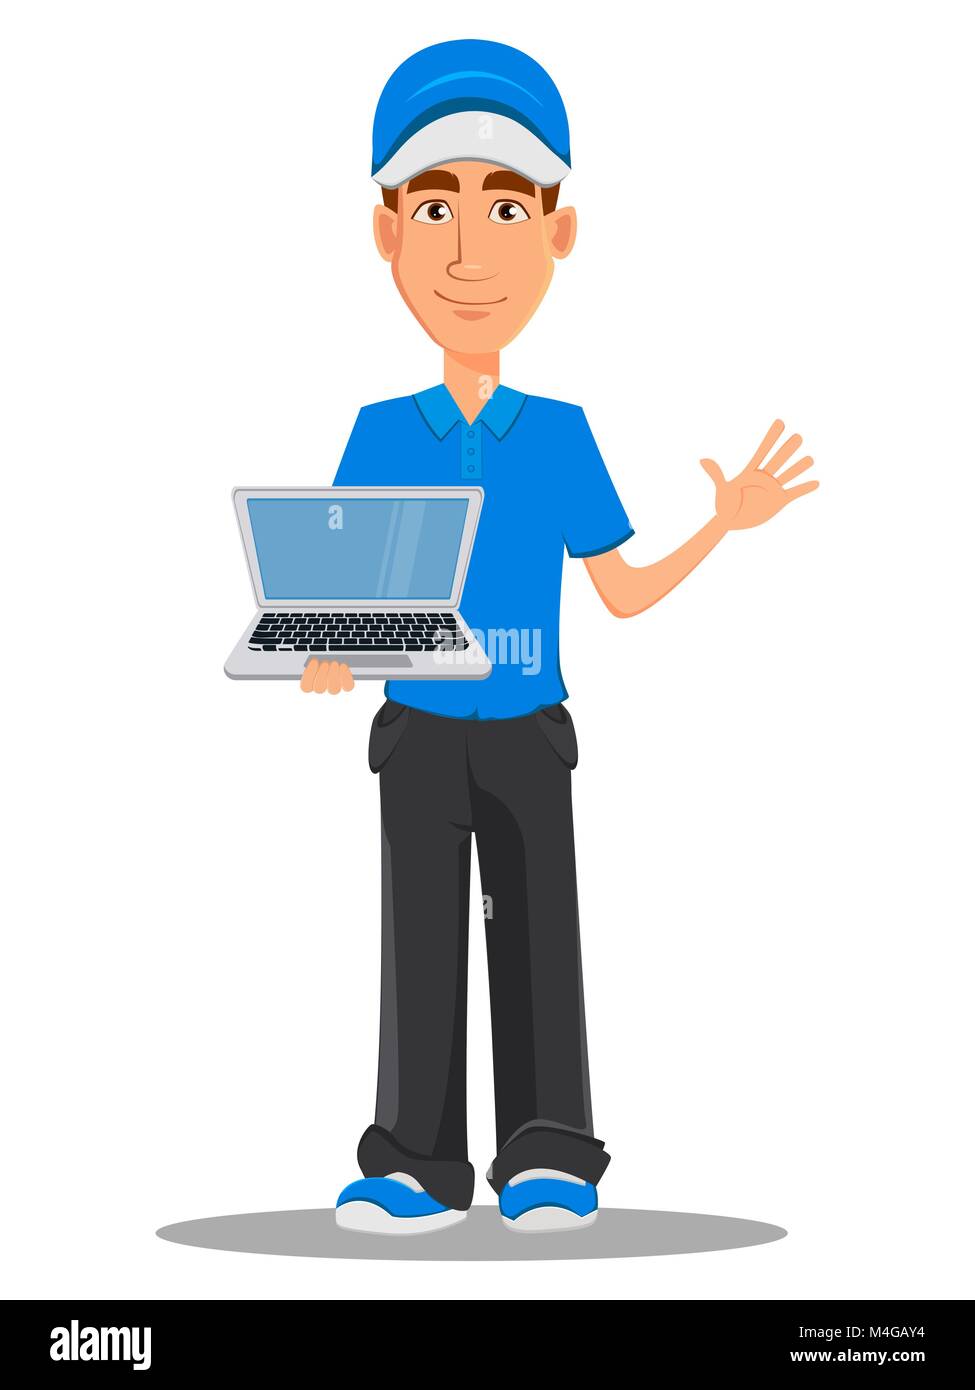 Smiling delivery man in blue uniform holding laptop. Vector illustration on white background. Stock Vector